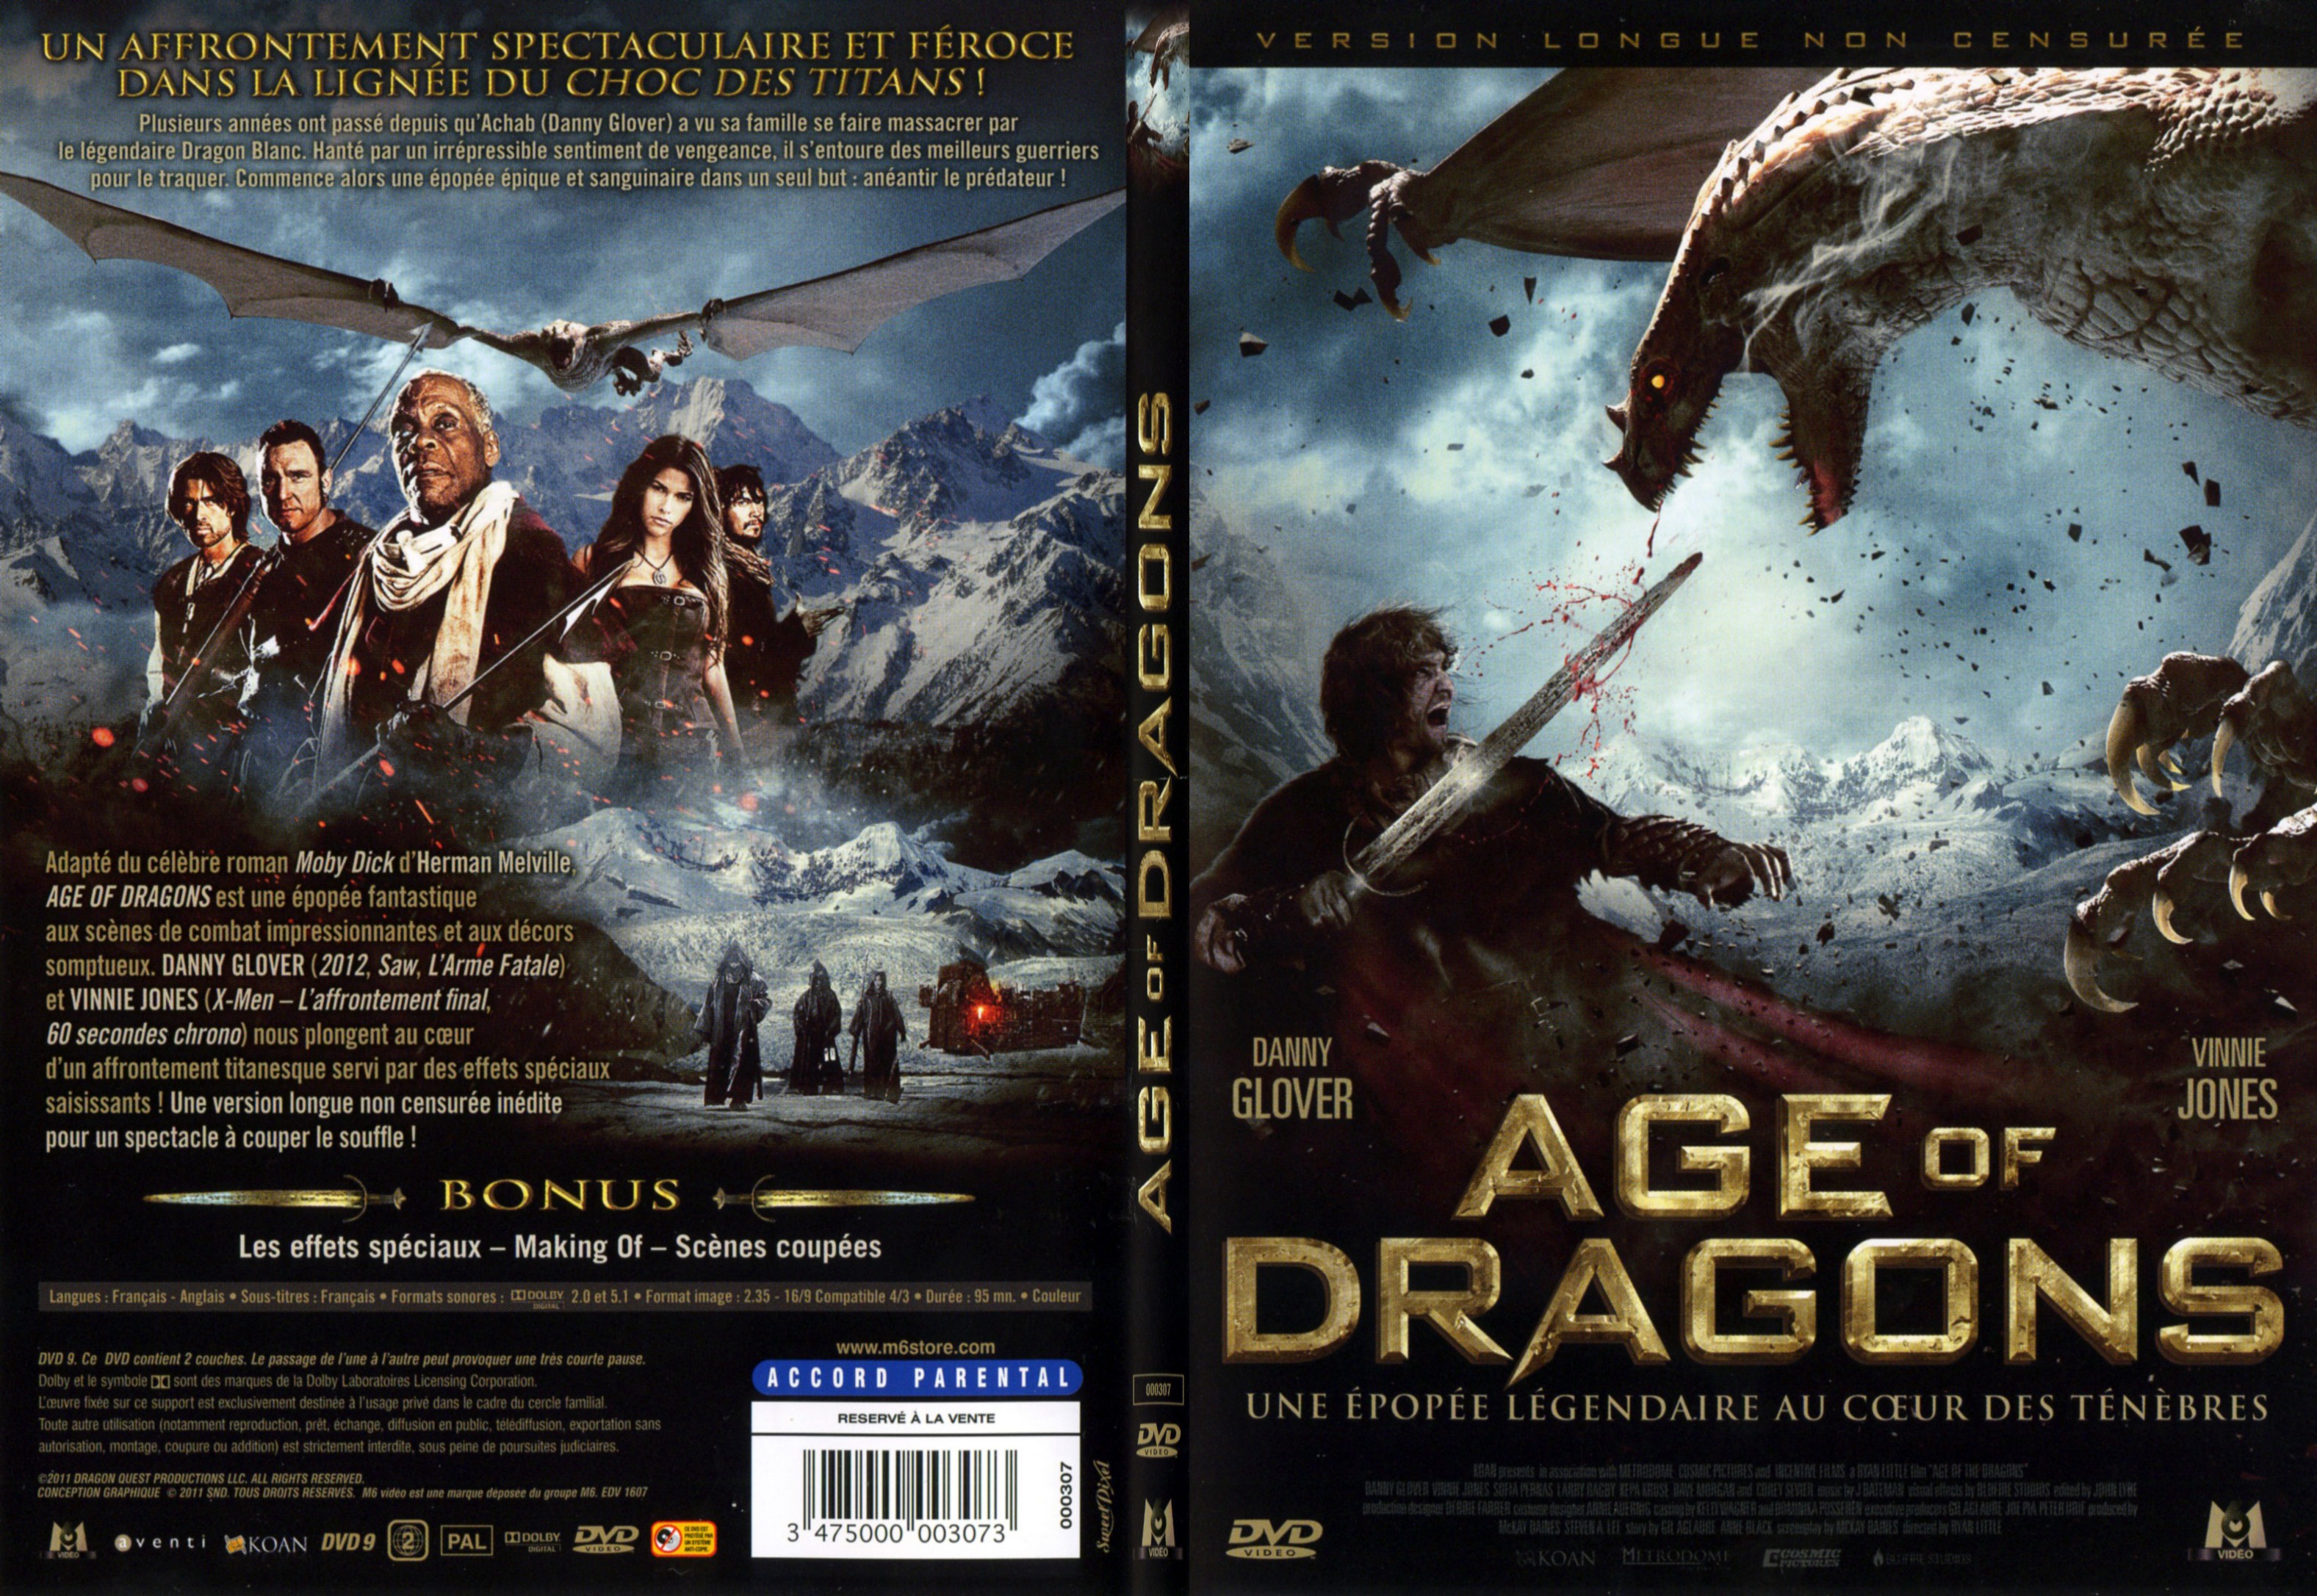 Jaquette DVD Age of dragons - SLIM